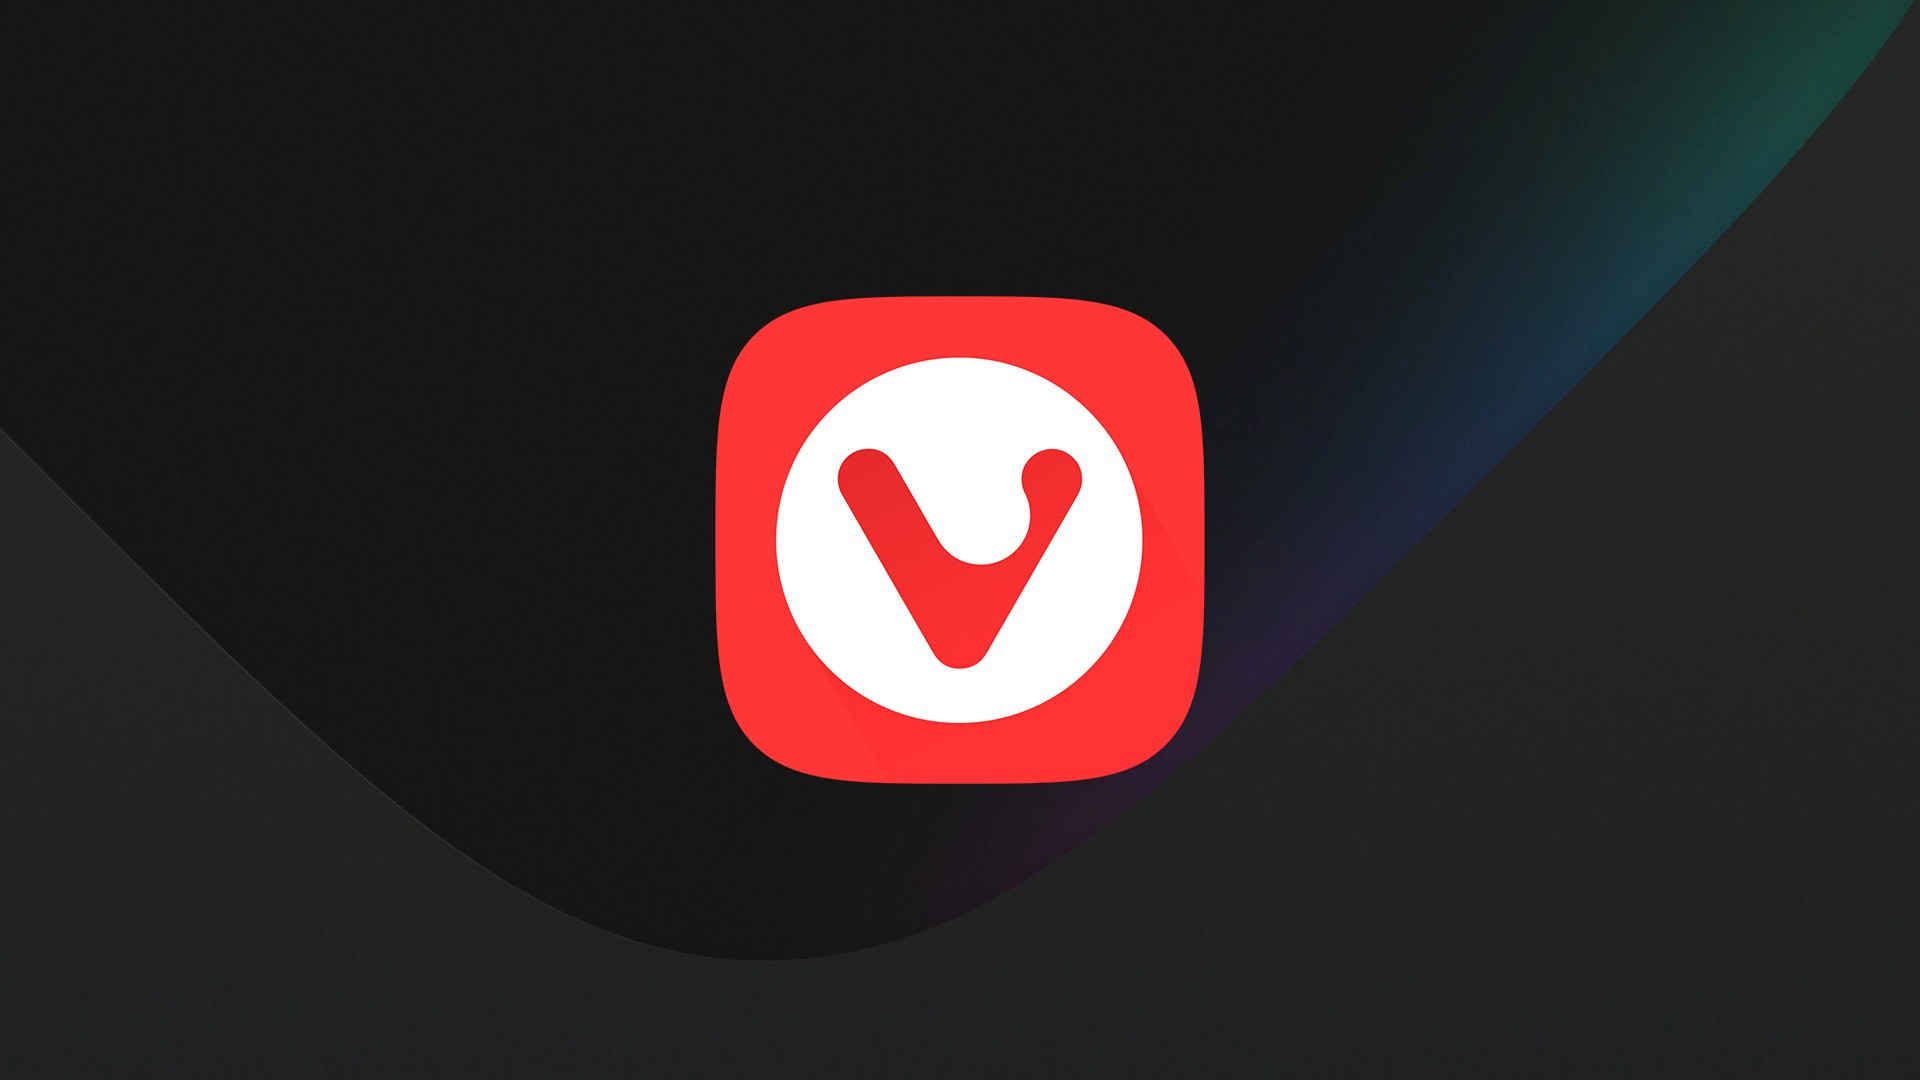 Vivaldi 5.6 is released with design improvements and integration with the social network Mastodon, rival of Twitter 